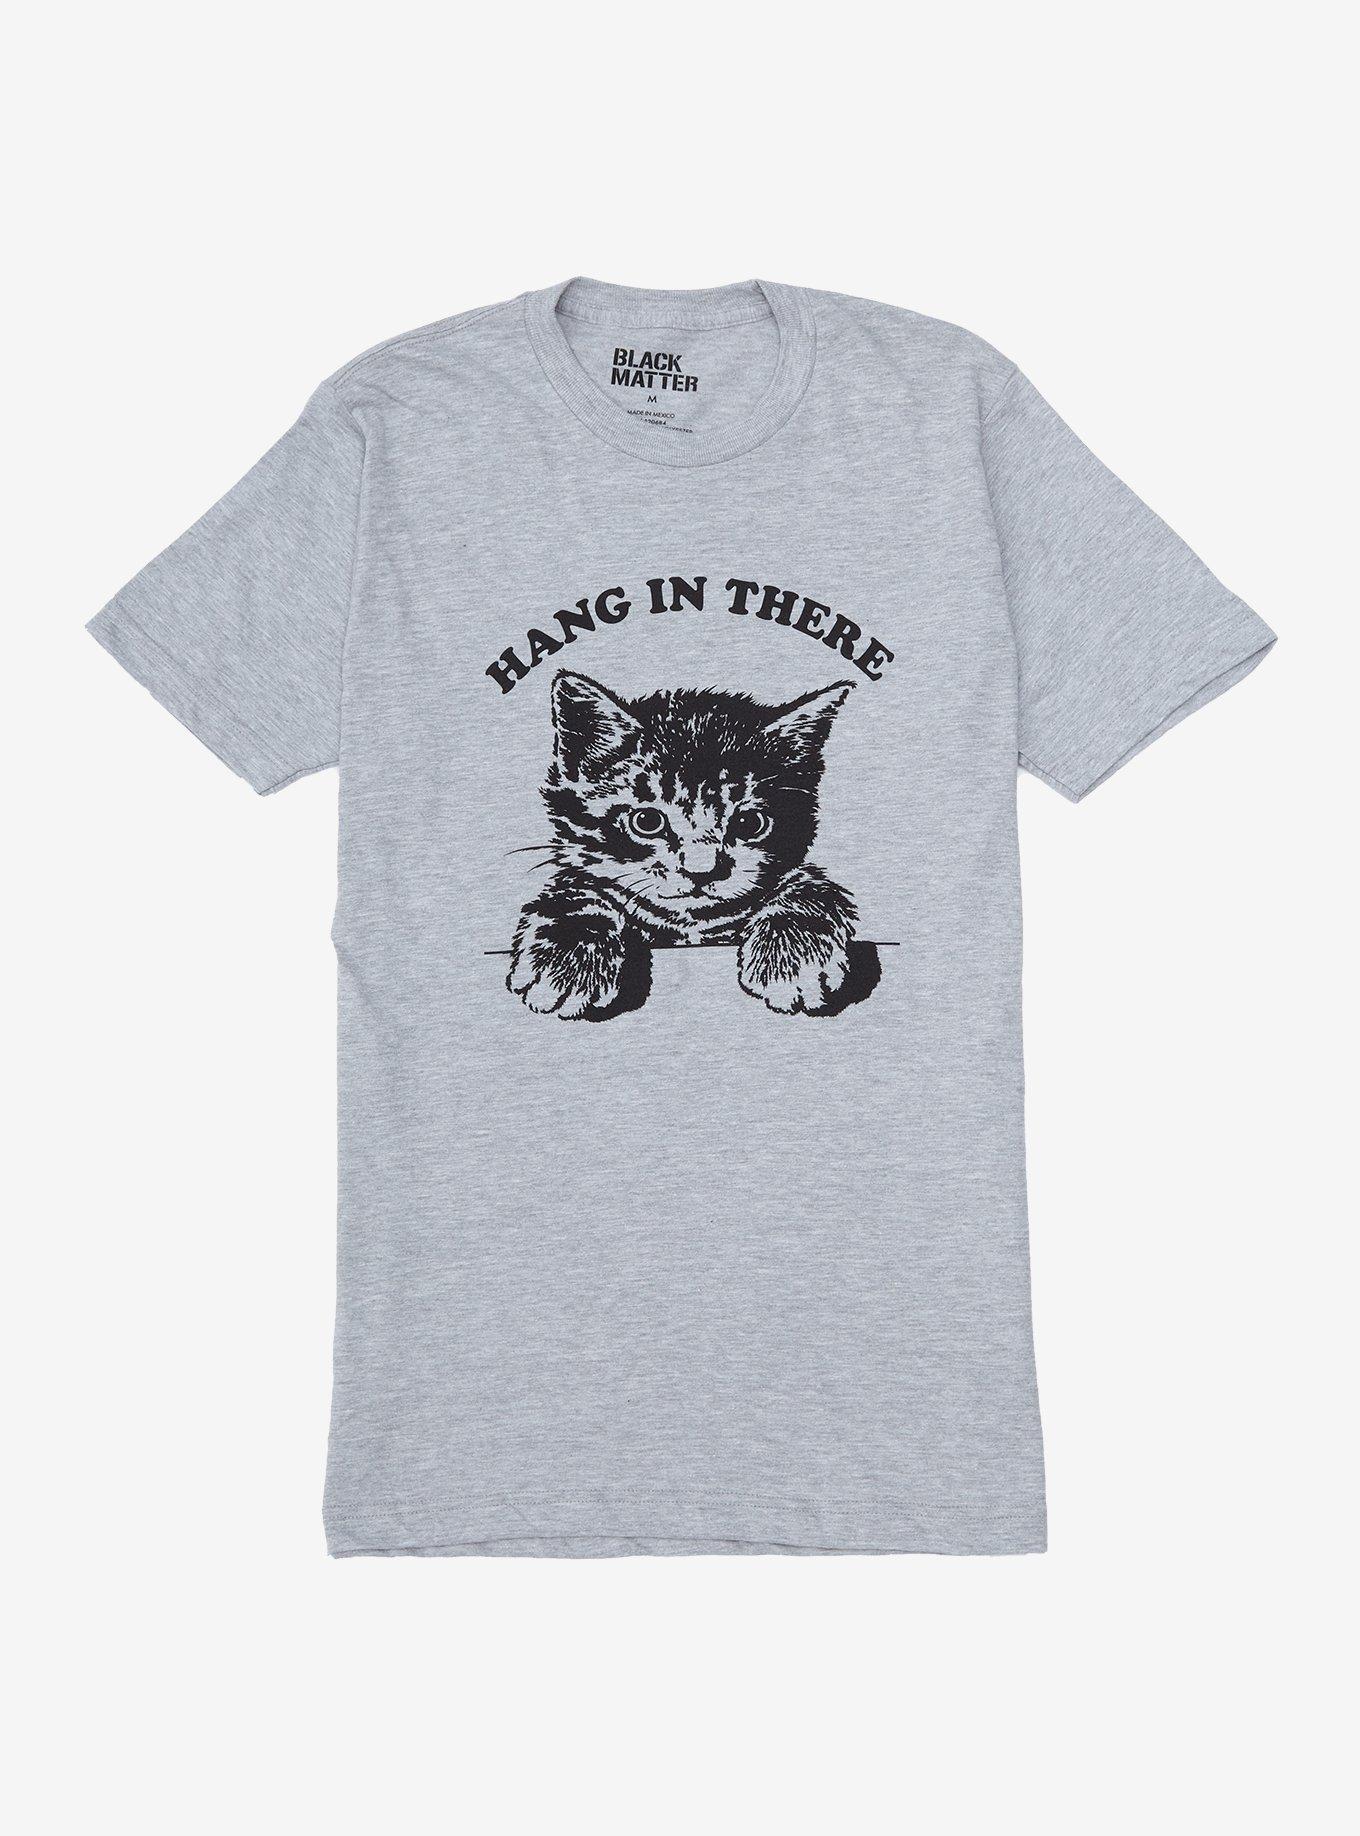 Hang In There Kitten T-Shirt | Hot Topic